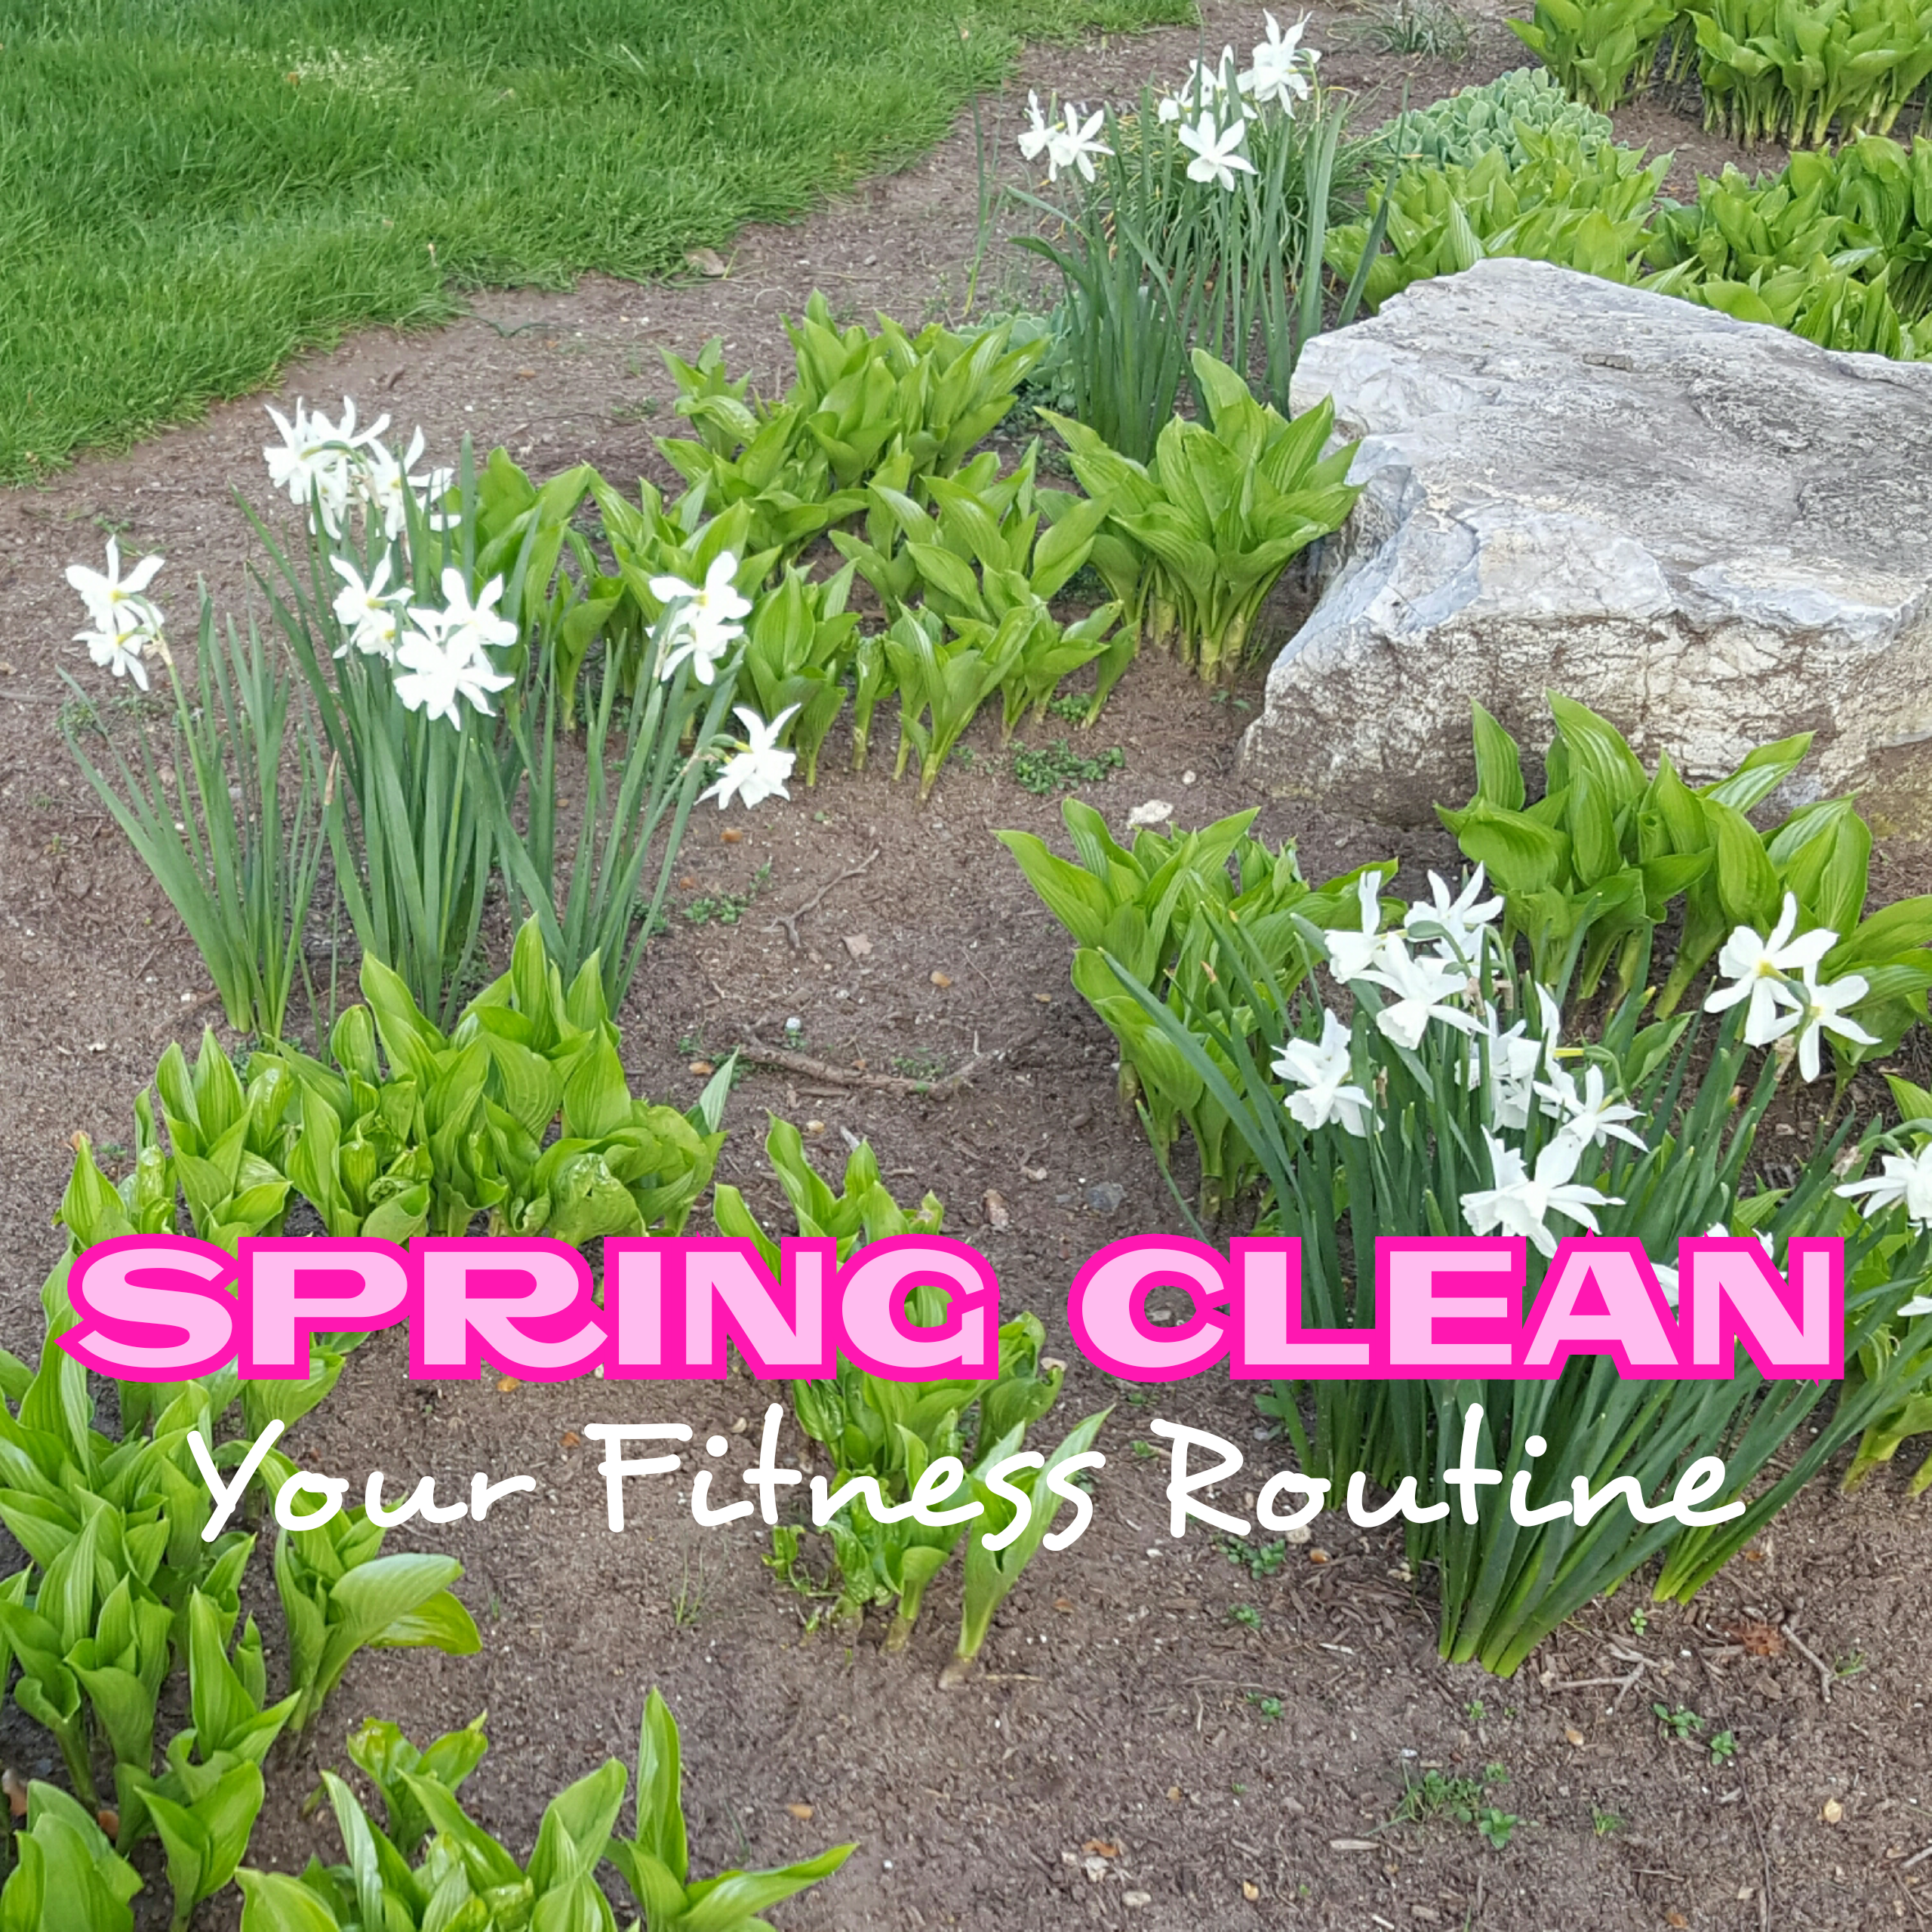 SPRING CLEAN YOUR FITNESS ROUTINE - followPhyllis